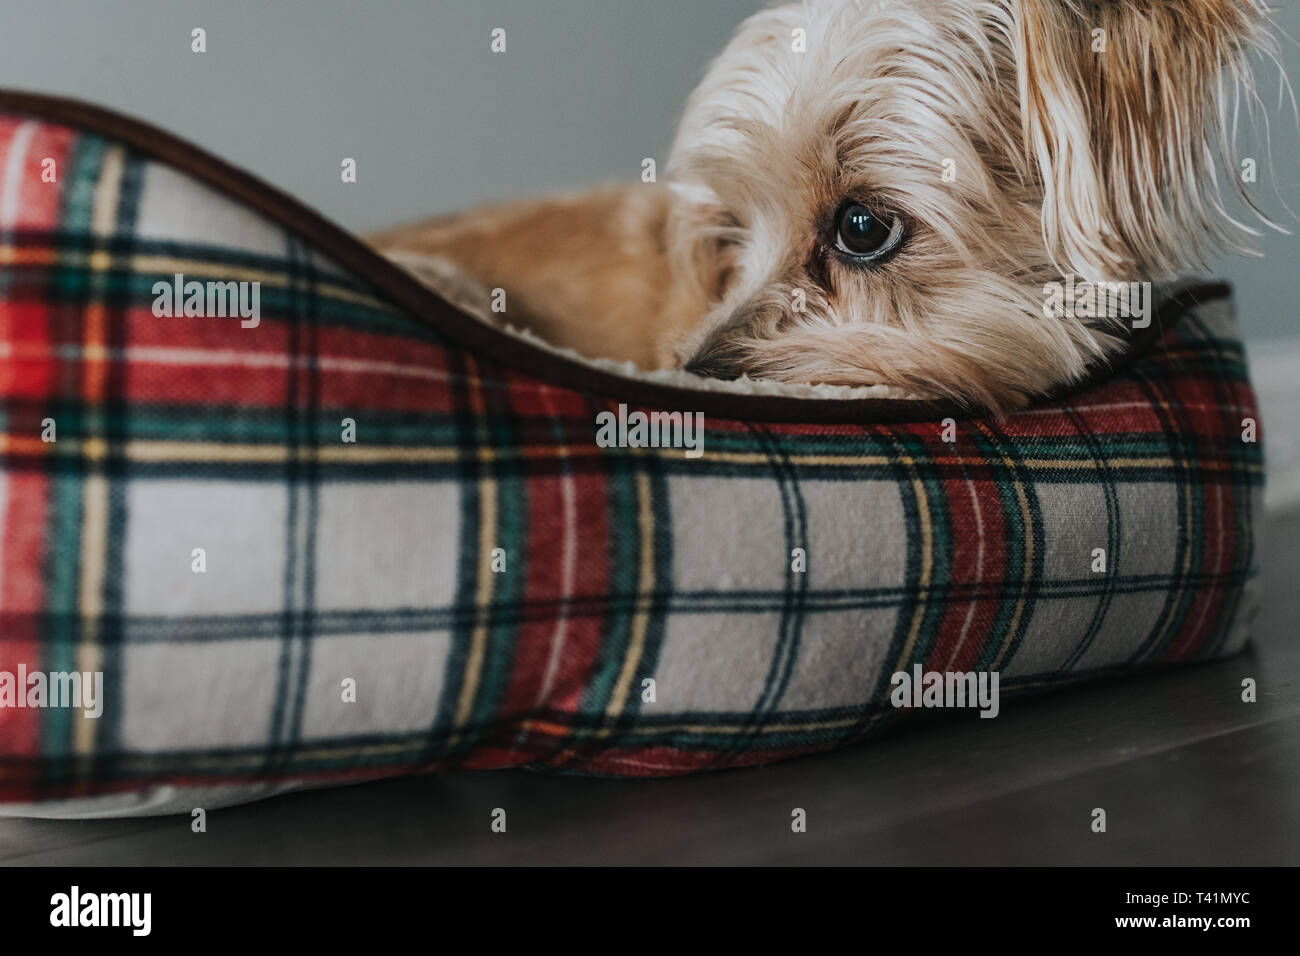 Small dog close up in bed Stock Photo